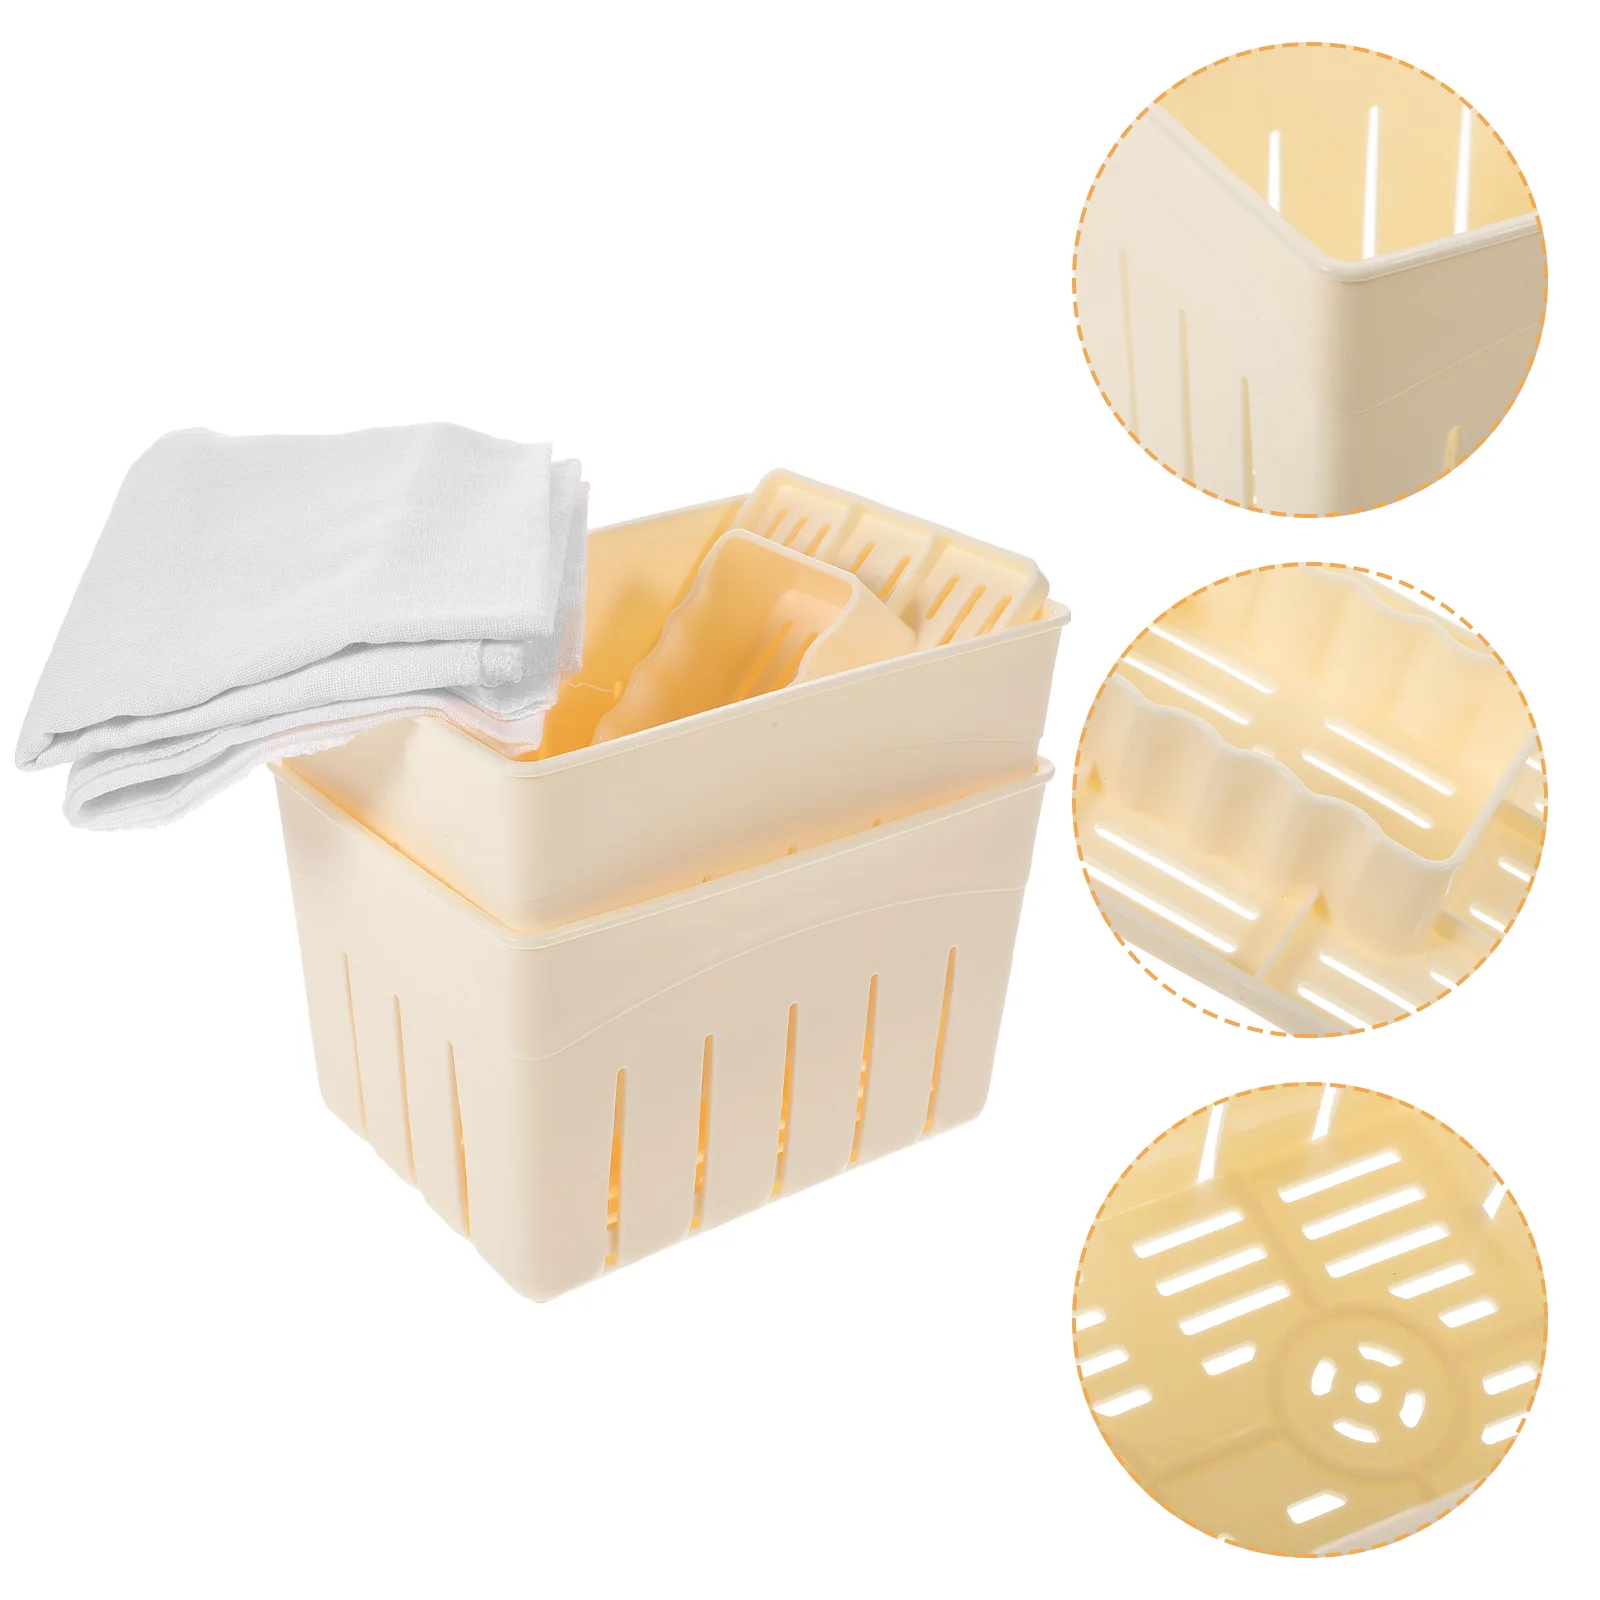 

Homemade Tofu Stamper Household Mold Bean Curd Making Tool Convenient Pressing Molds